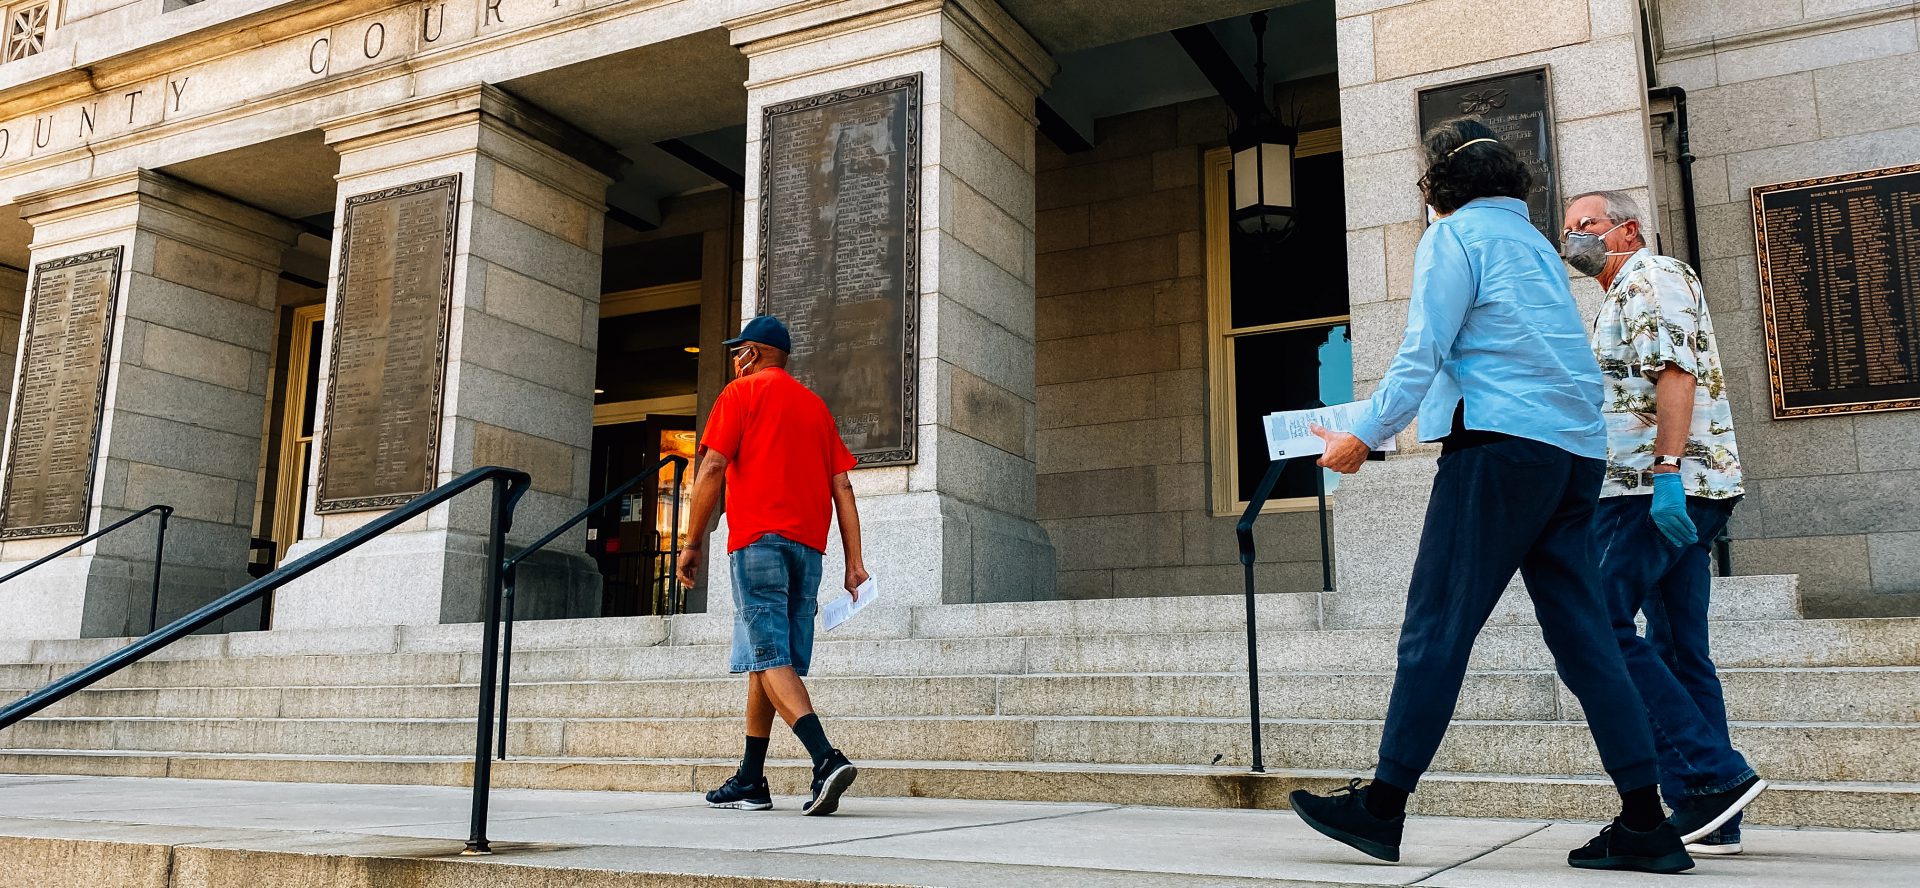 Voters walk along the steps of the York County Courthouse on June 1, 2020, to deposit their ballots in a drop box ahead of the Pennsylvania primary.